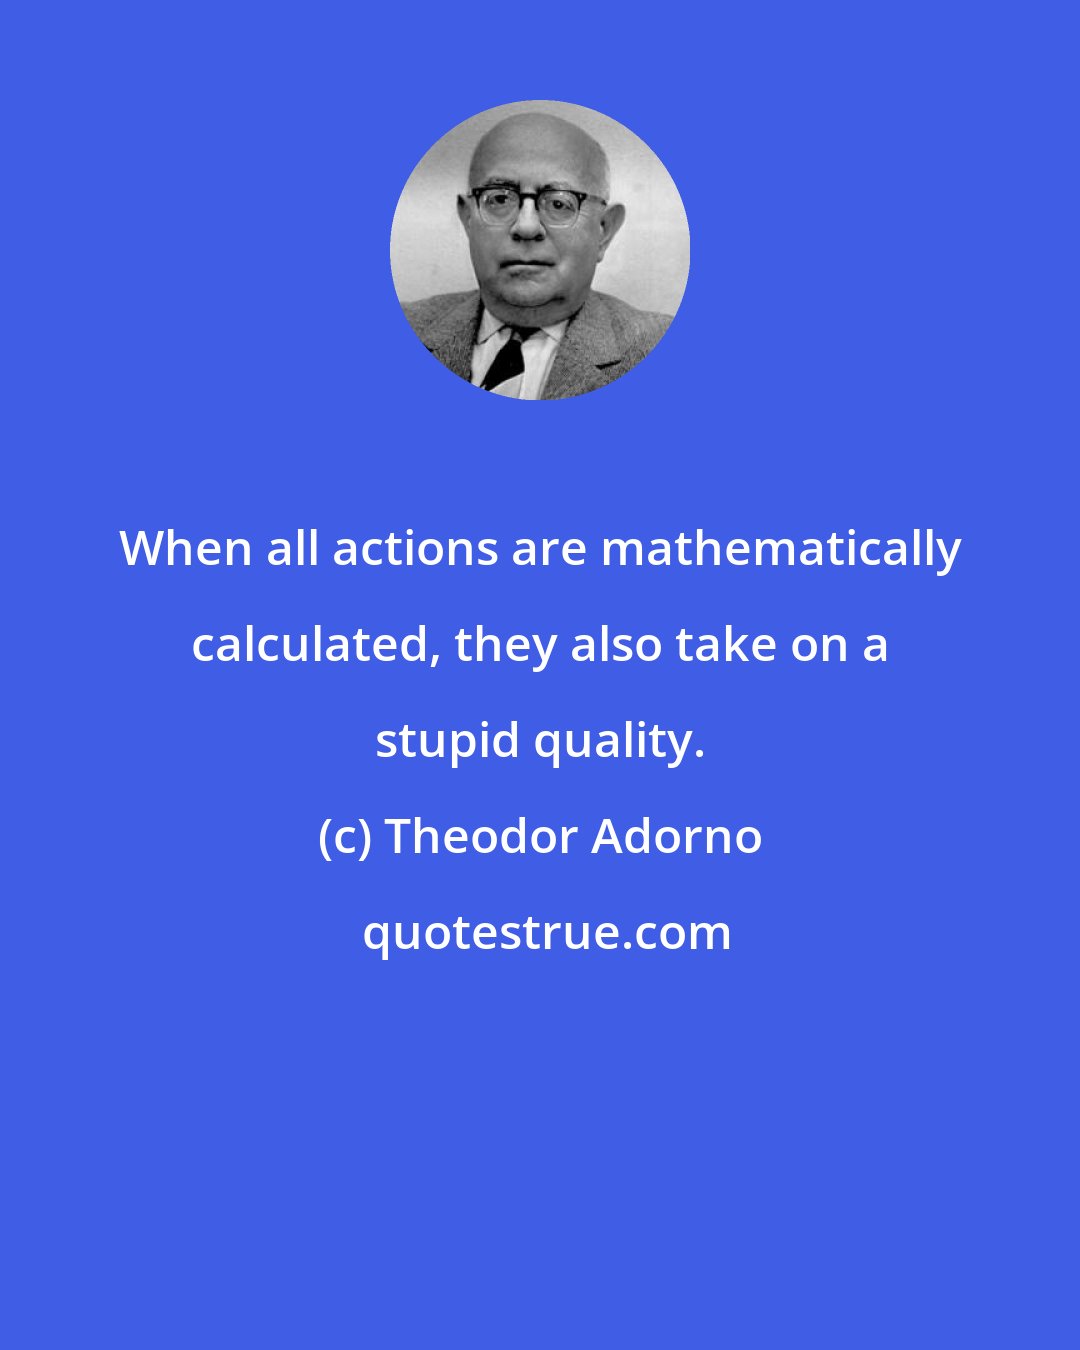 Theodor Adorno: When all actions are mathematically calculated, they also take on a stupid quality.